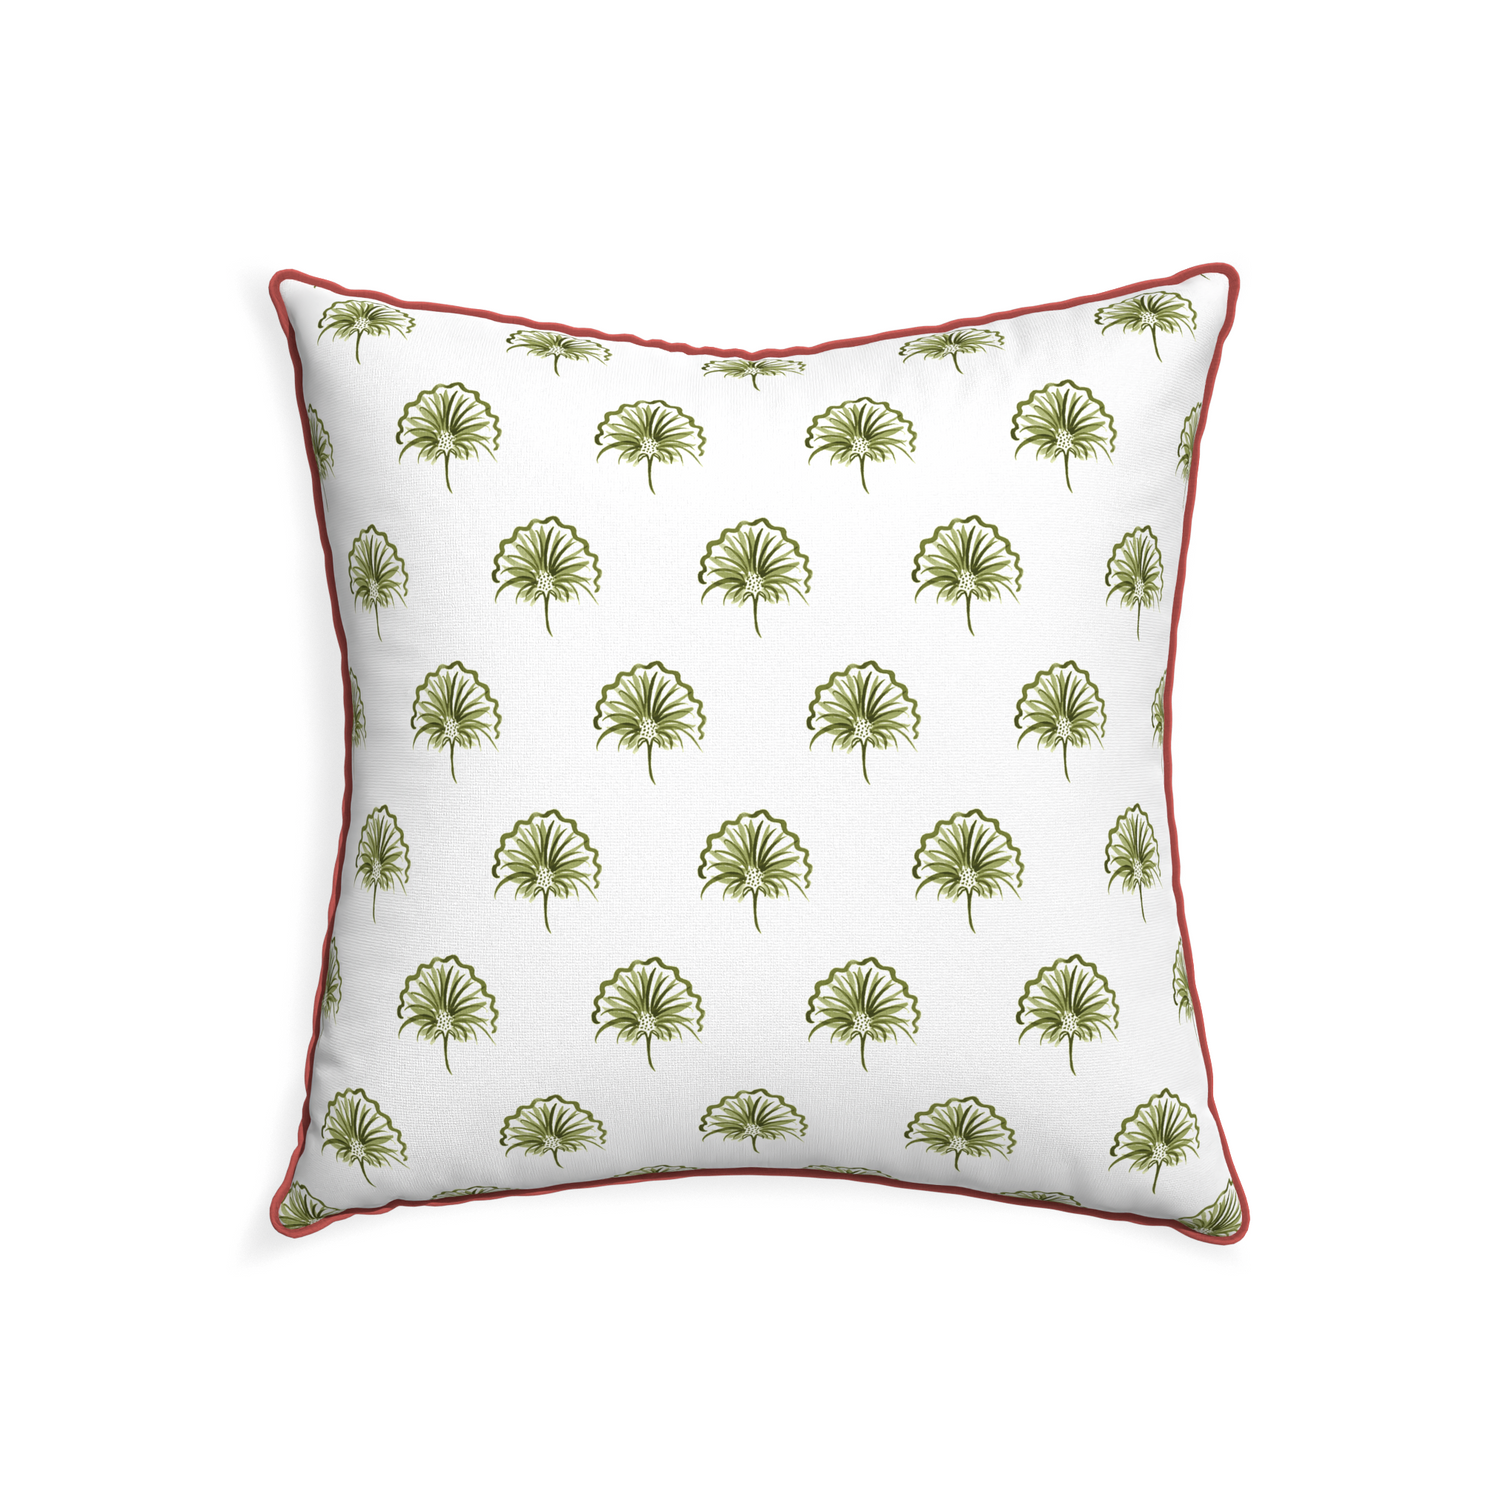 22-square penelope moss custom green floralpillow with c piping on white background